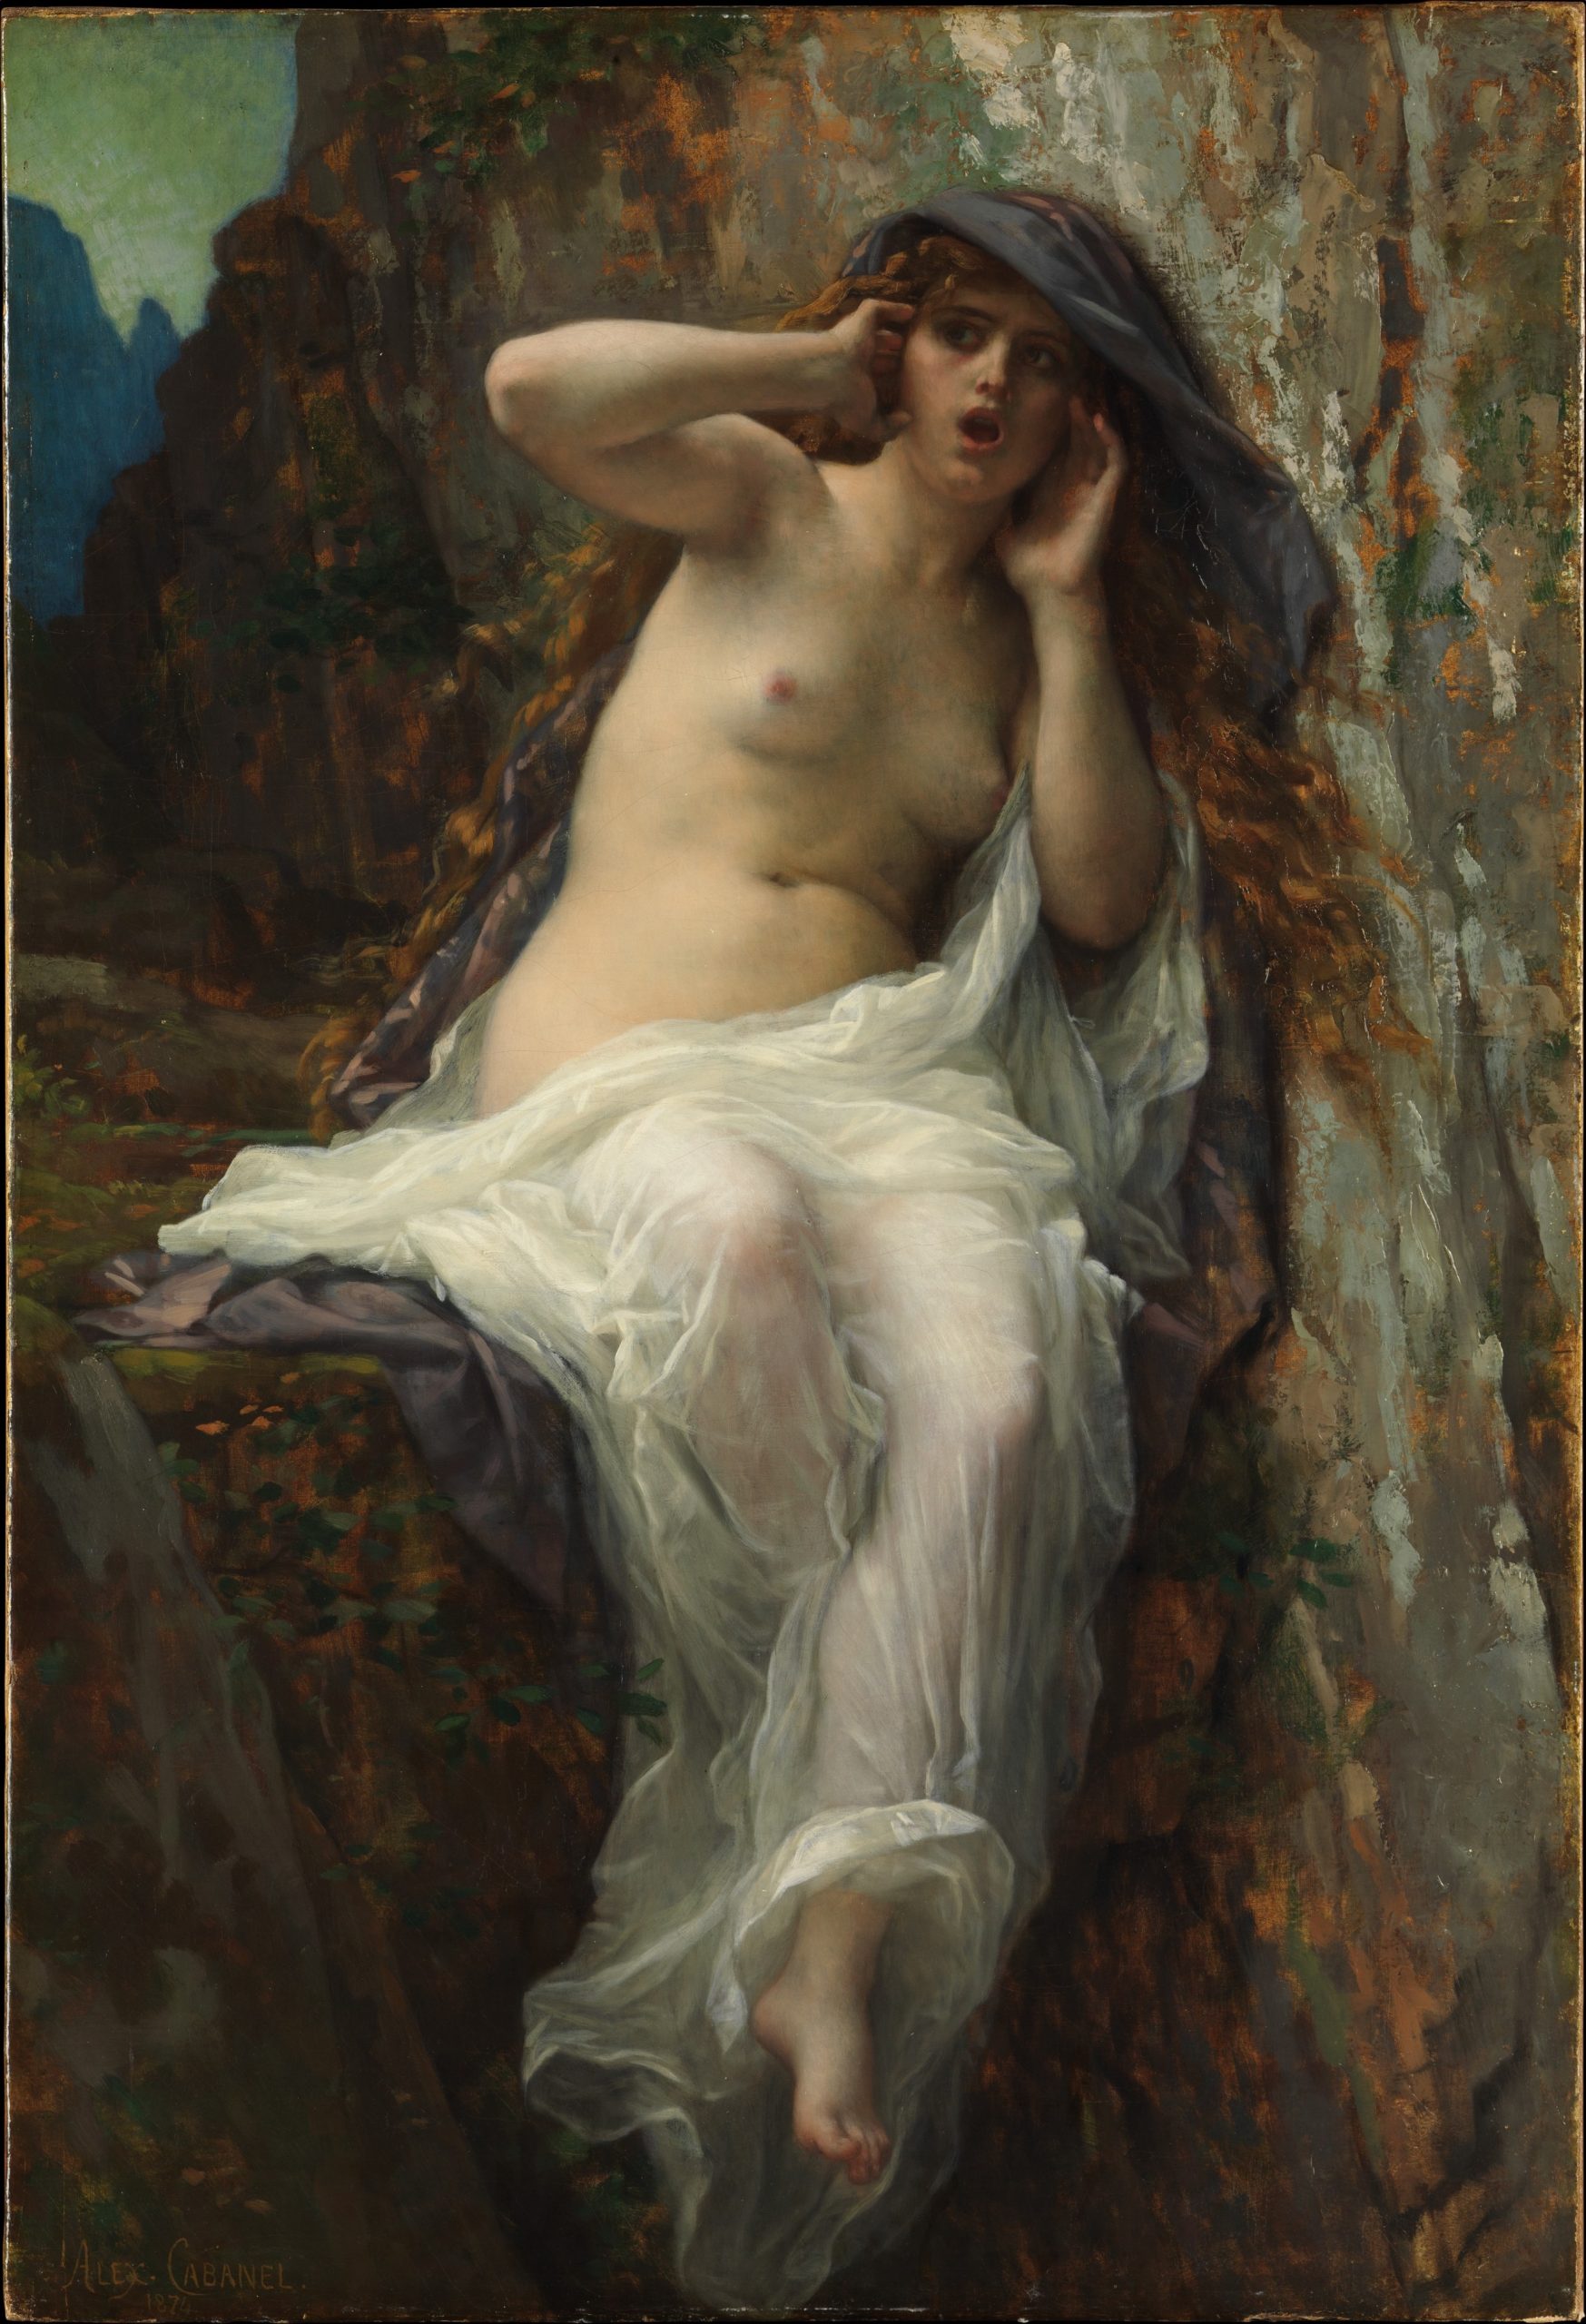 A painting of a woman with her mouth agape. She is partially draped in a transparent white material. This woman is seated on a large rocky ledge